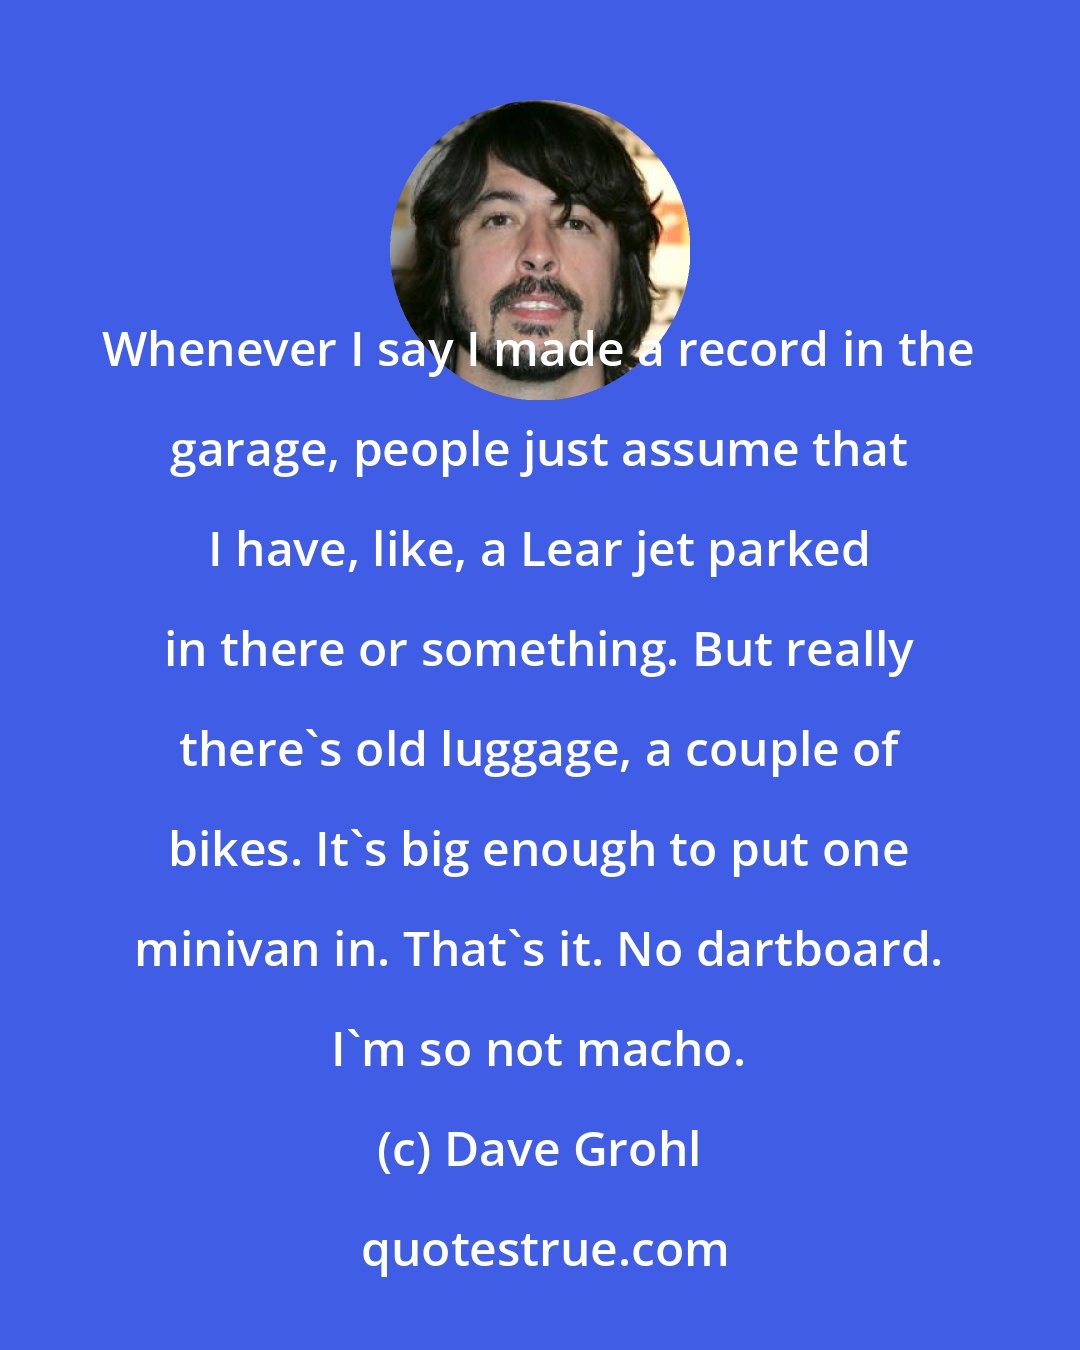 Dave Grohl: Whenever I say I made a record in the garage, people just assume that I have, like, a Lear jet parked in there or something. But really there's old luggage, a couple of bikes. It's big enough to put one minivan in. That's it. No dartboard. I'm so not macho.